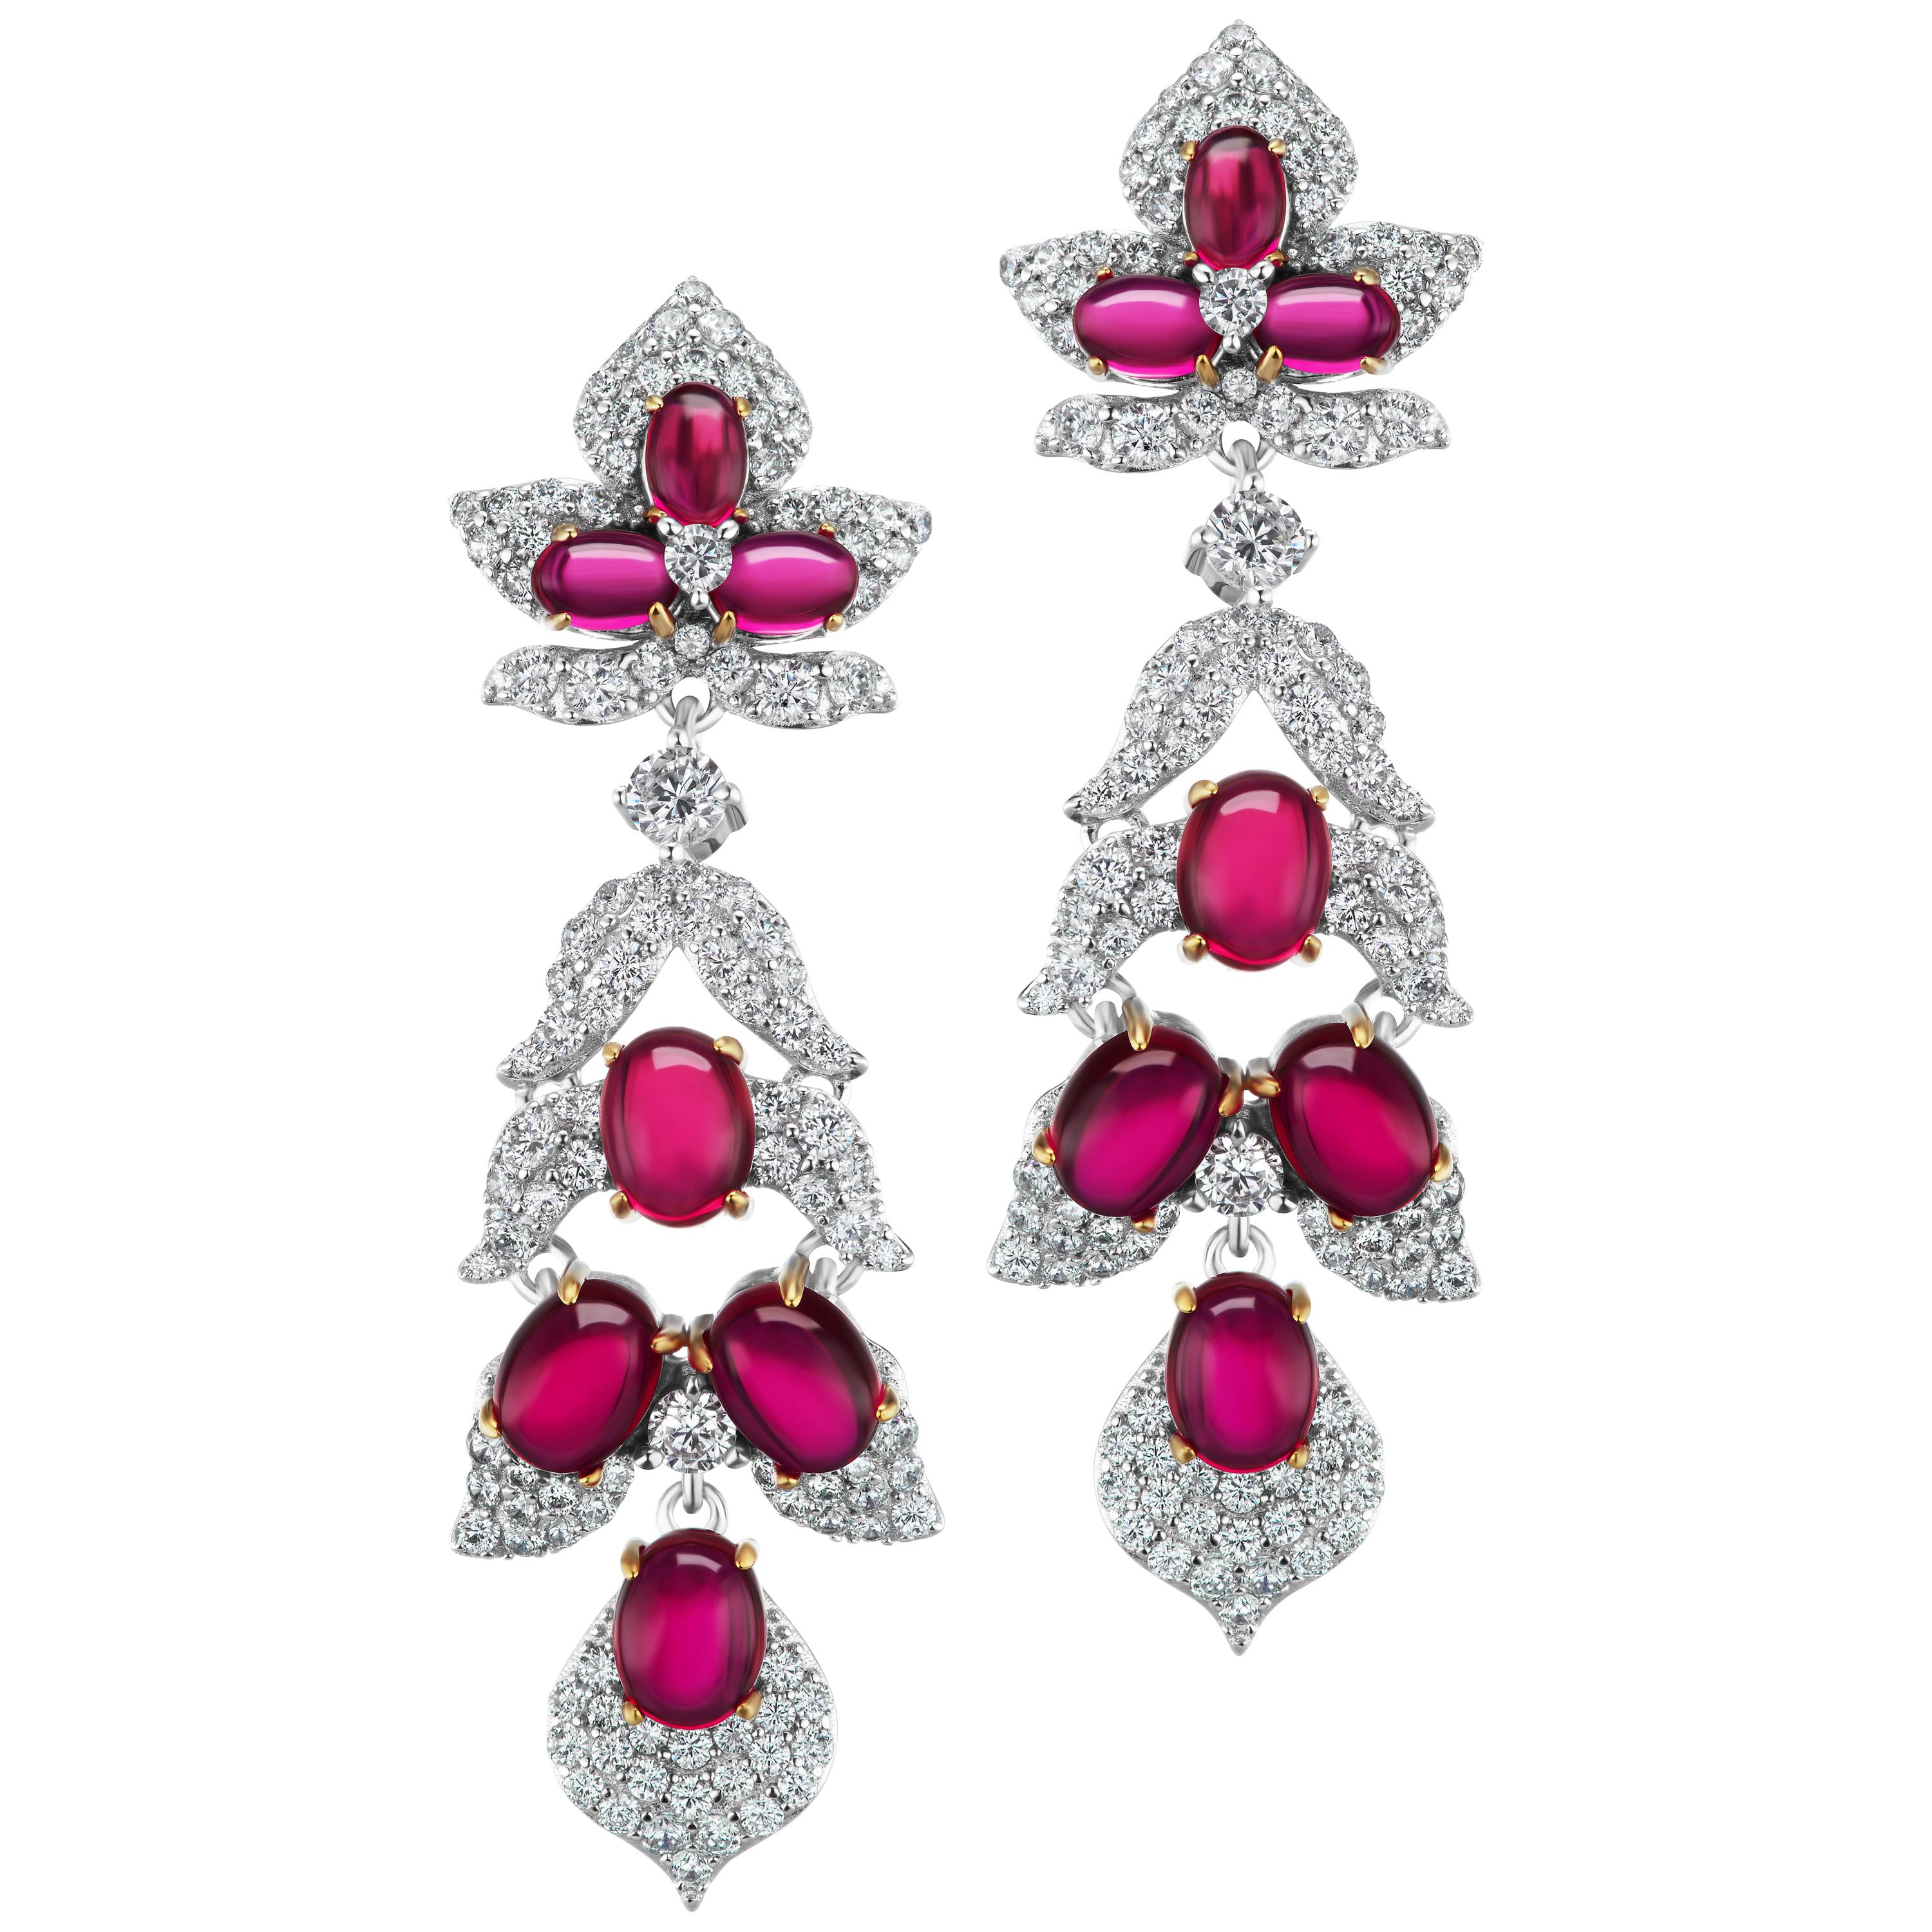 Faux Cabochon Ruby Pave Cubic Zirconia Sterling Earrings